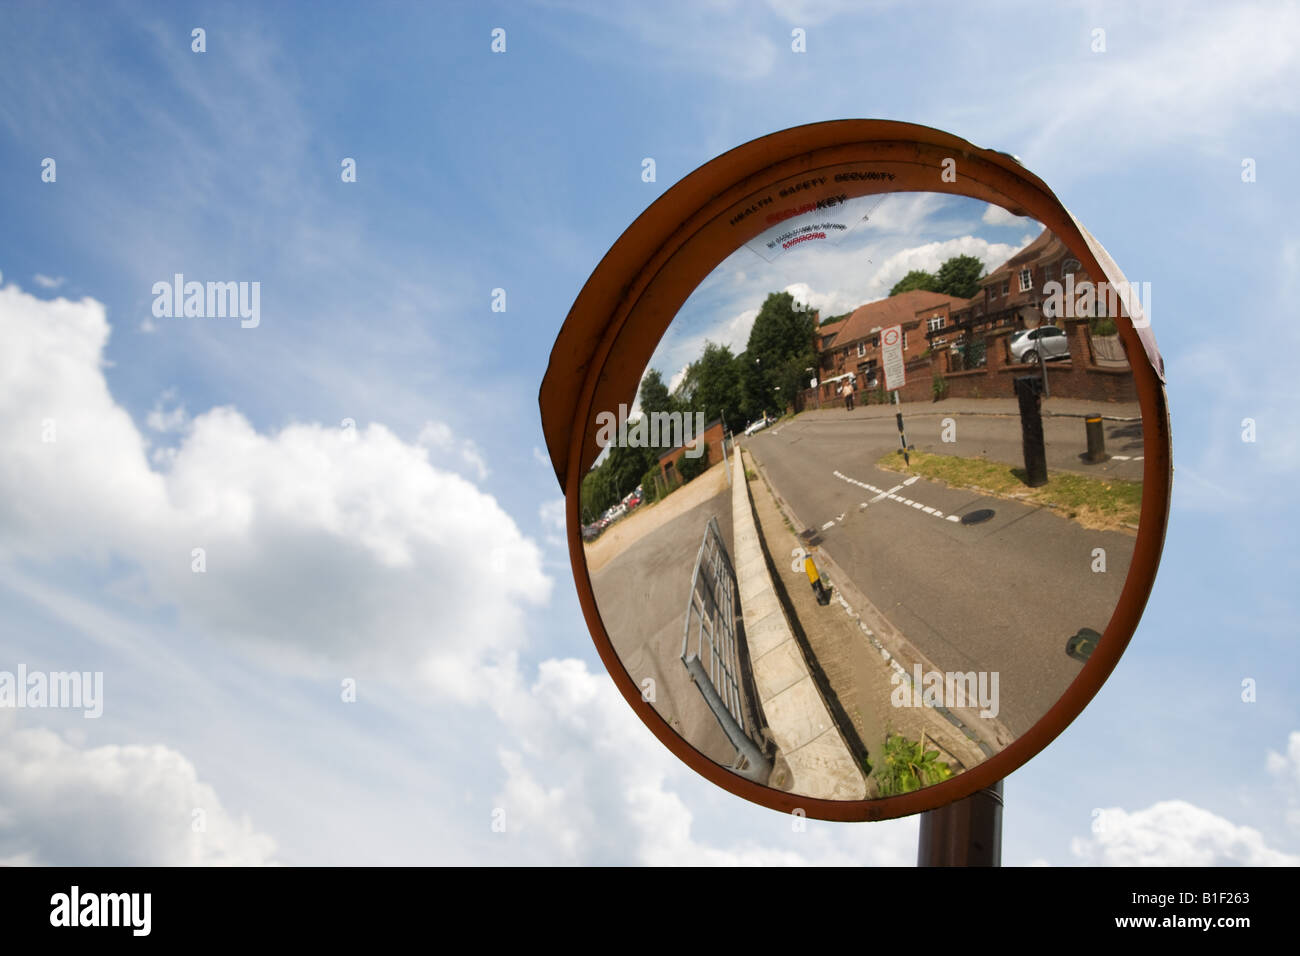 A convex mirror used as a hazard warning traffic safety device. Stock Photo